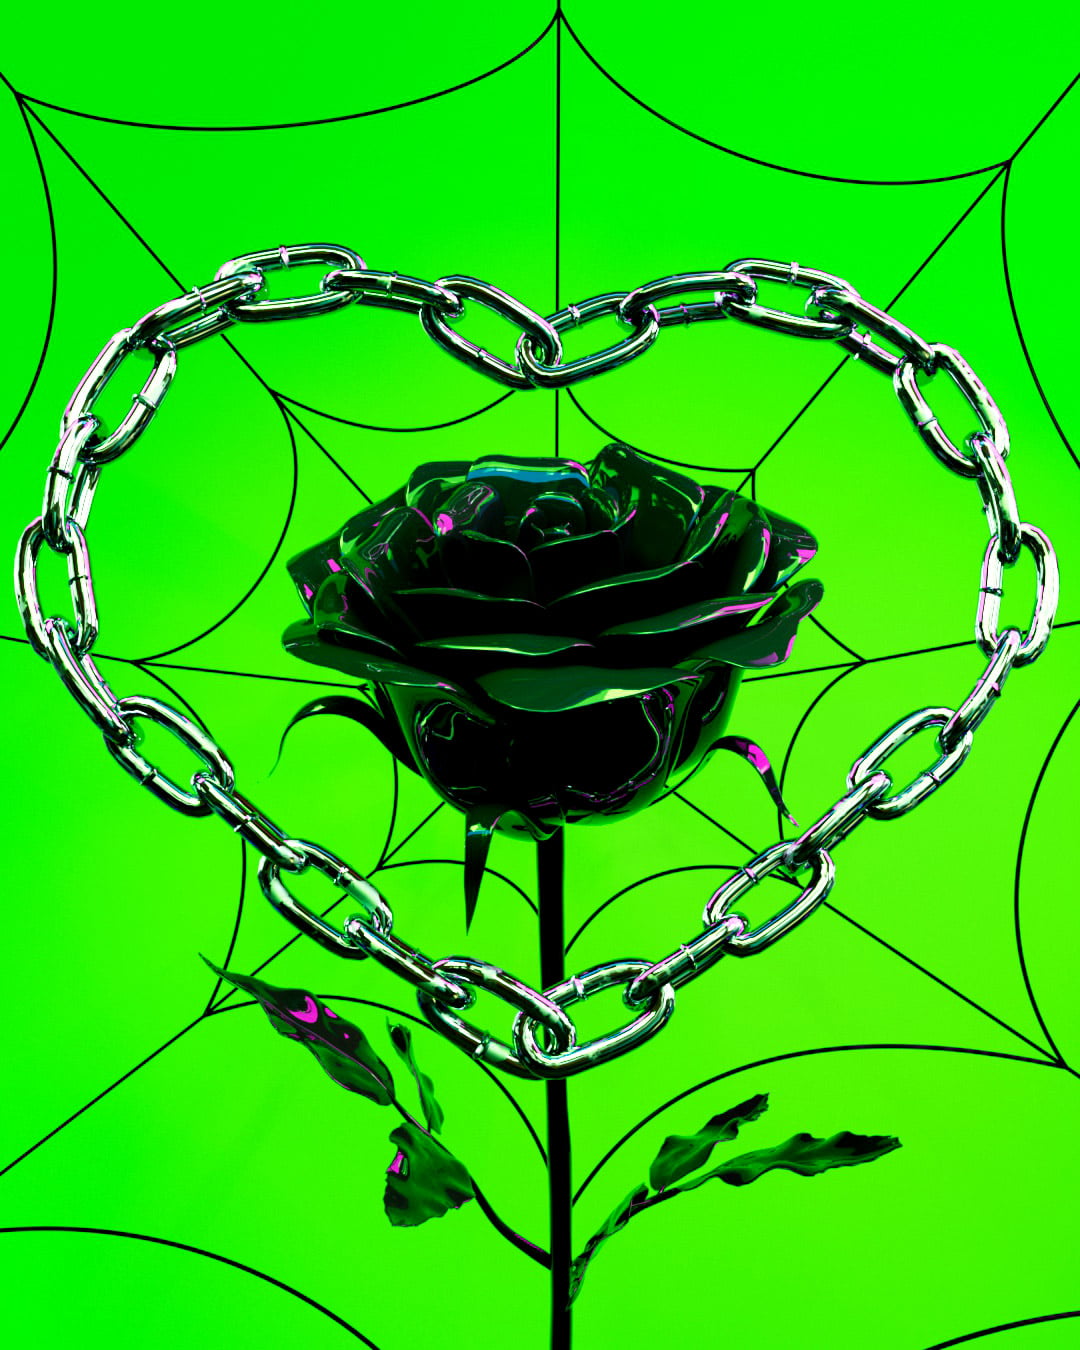 Neon green background with black spiderweb filling the space. A metallic heart shaped chain in the center framing a black slick oil rose.